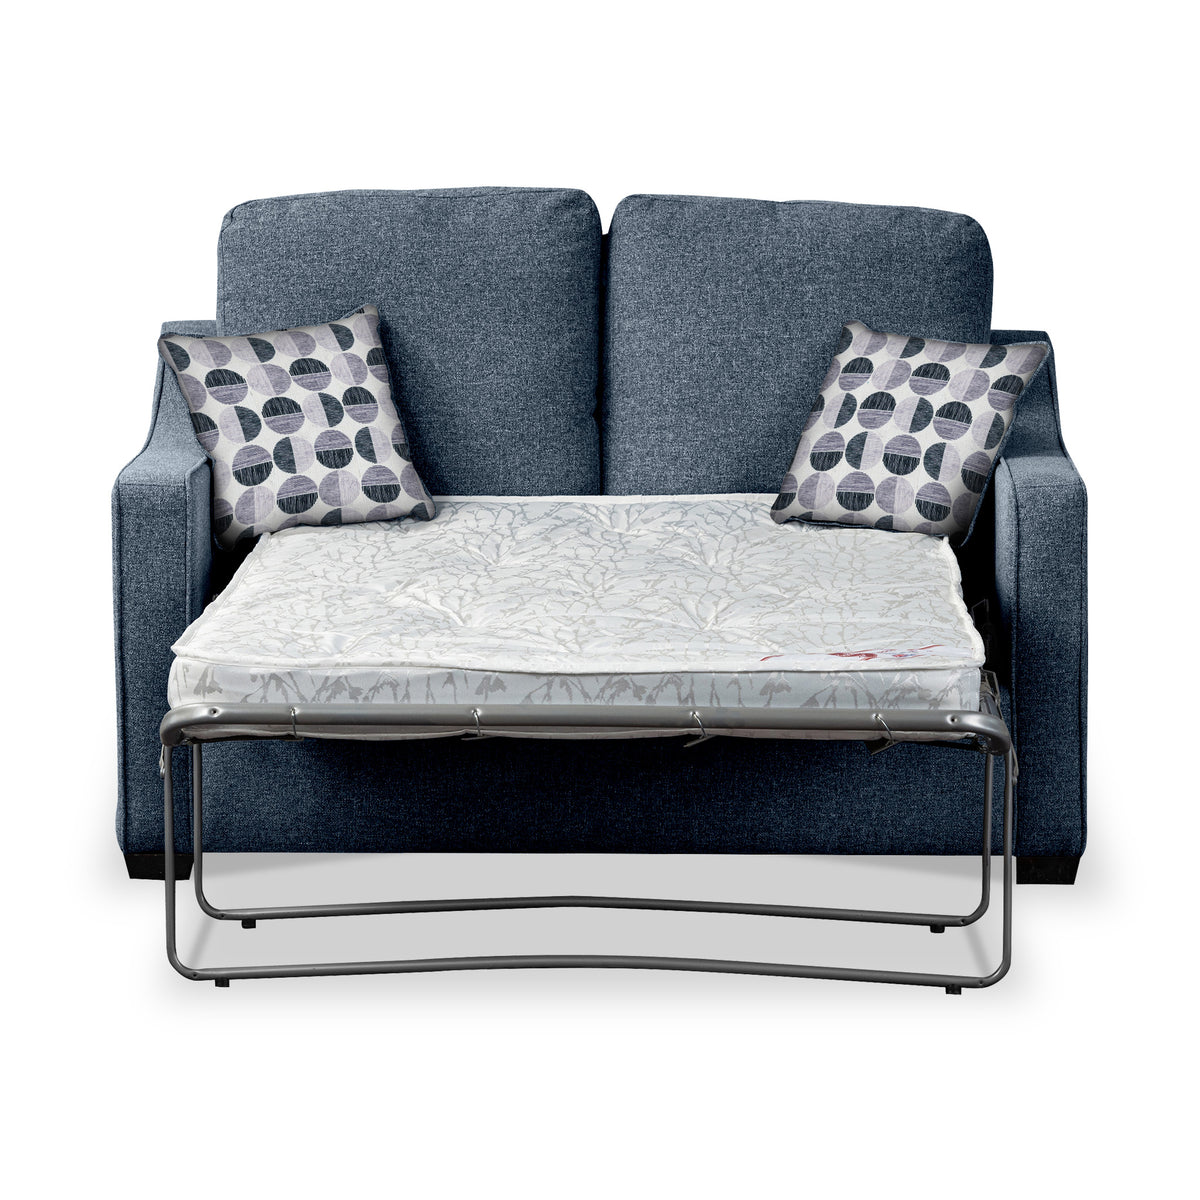 Fenton Midnight Soft Weave 2 Seater Sofabed with Mono Scatter Cushions from Roseland Furniture